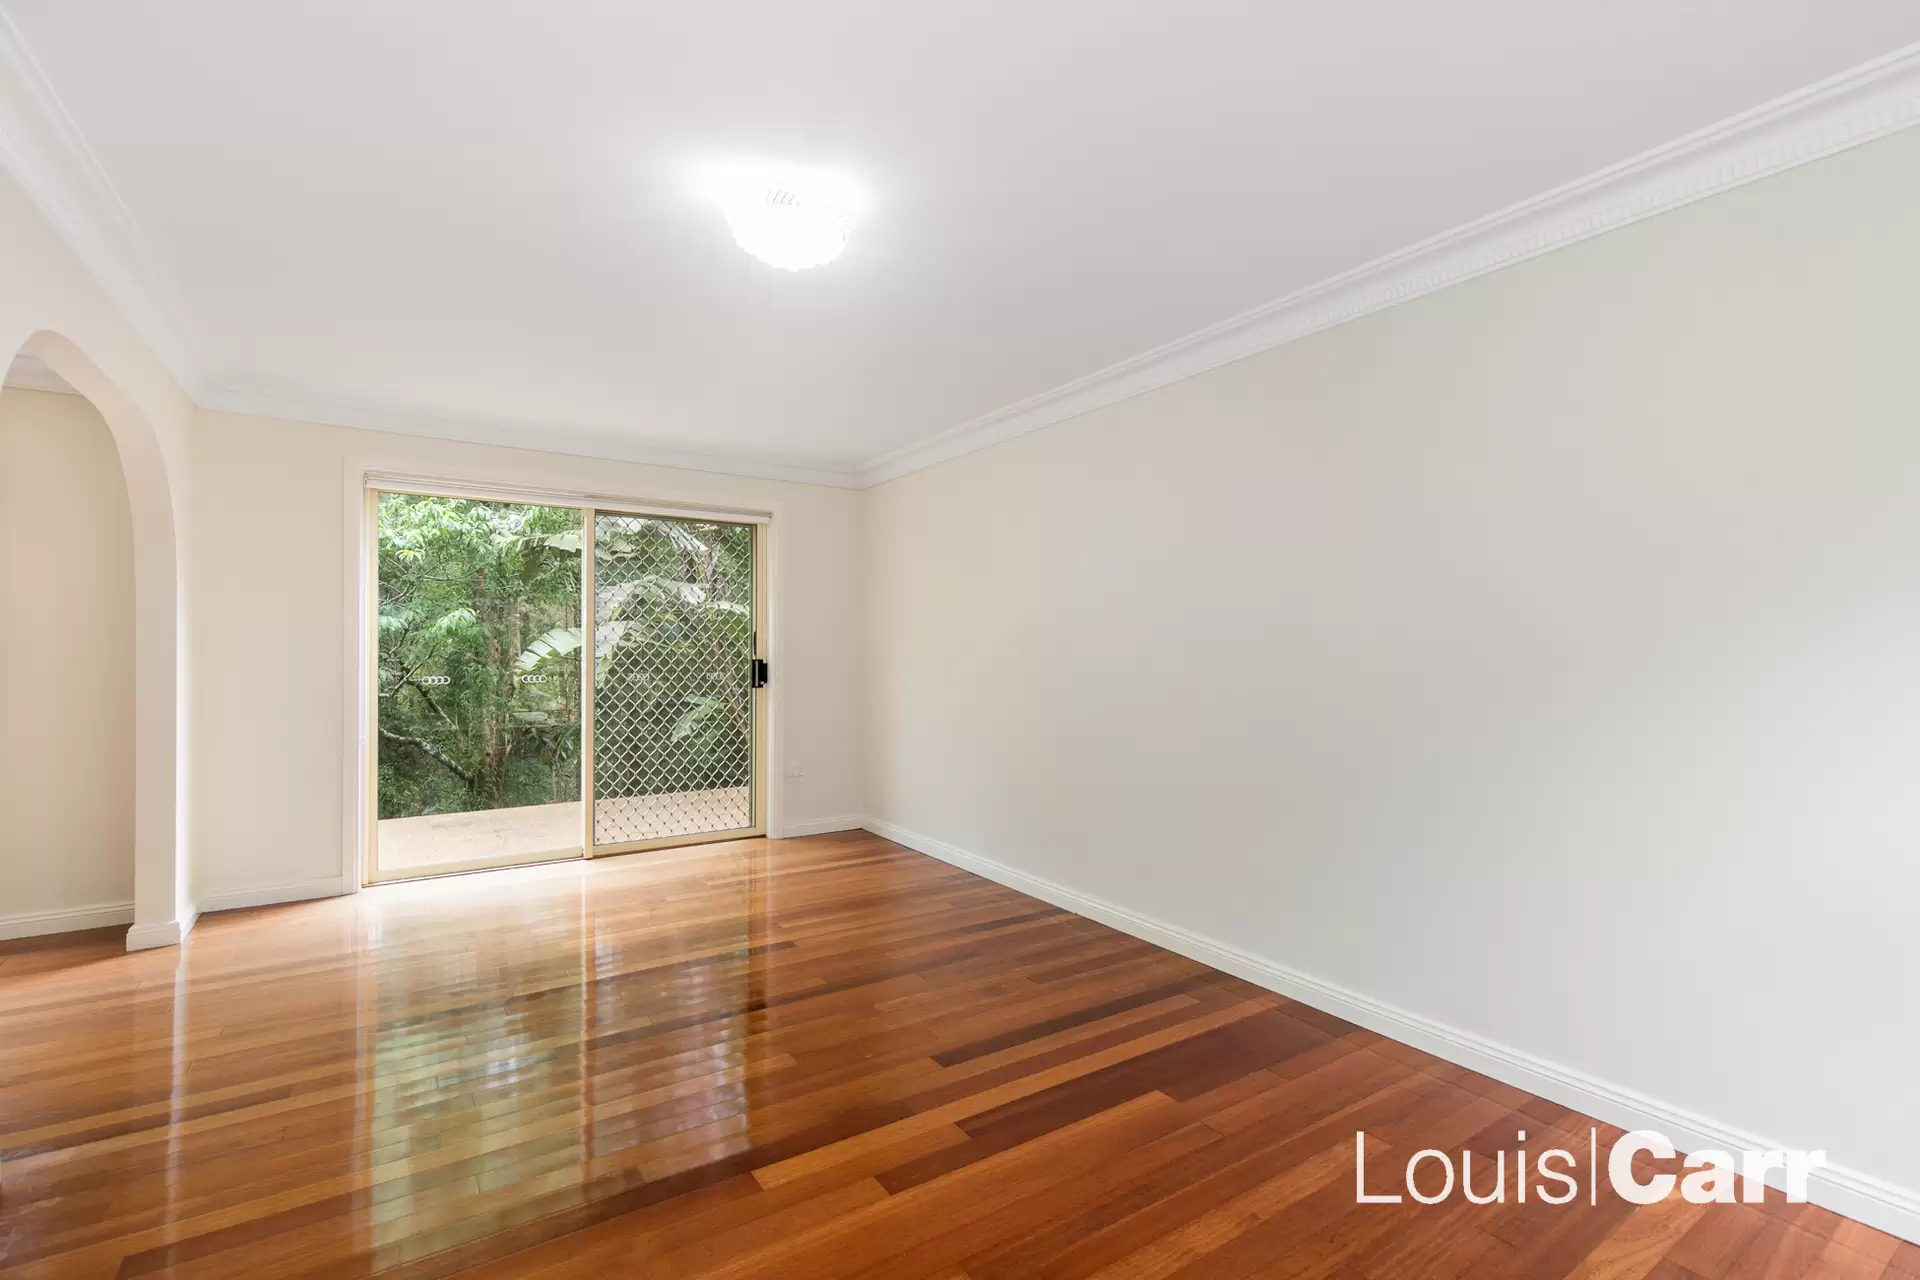 Photo #4: 2/14 Willowleaf Place, West Pennant Hills - Leased by Louis Carr Real Estate